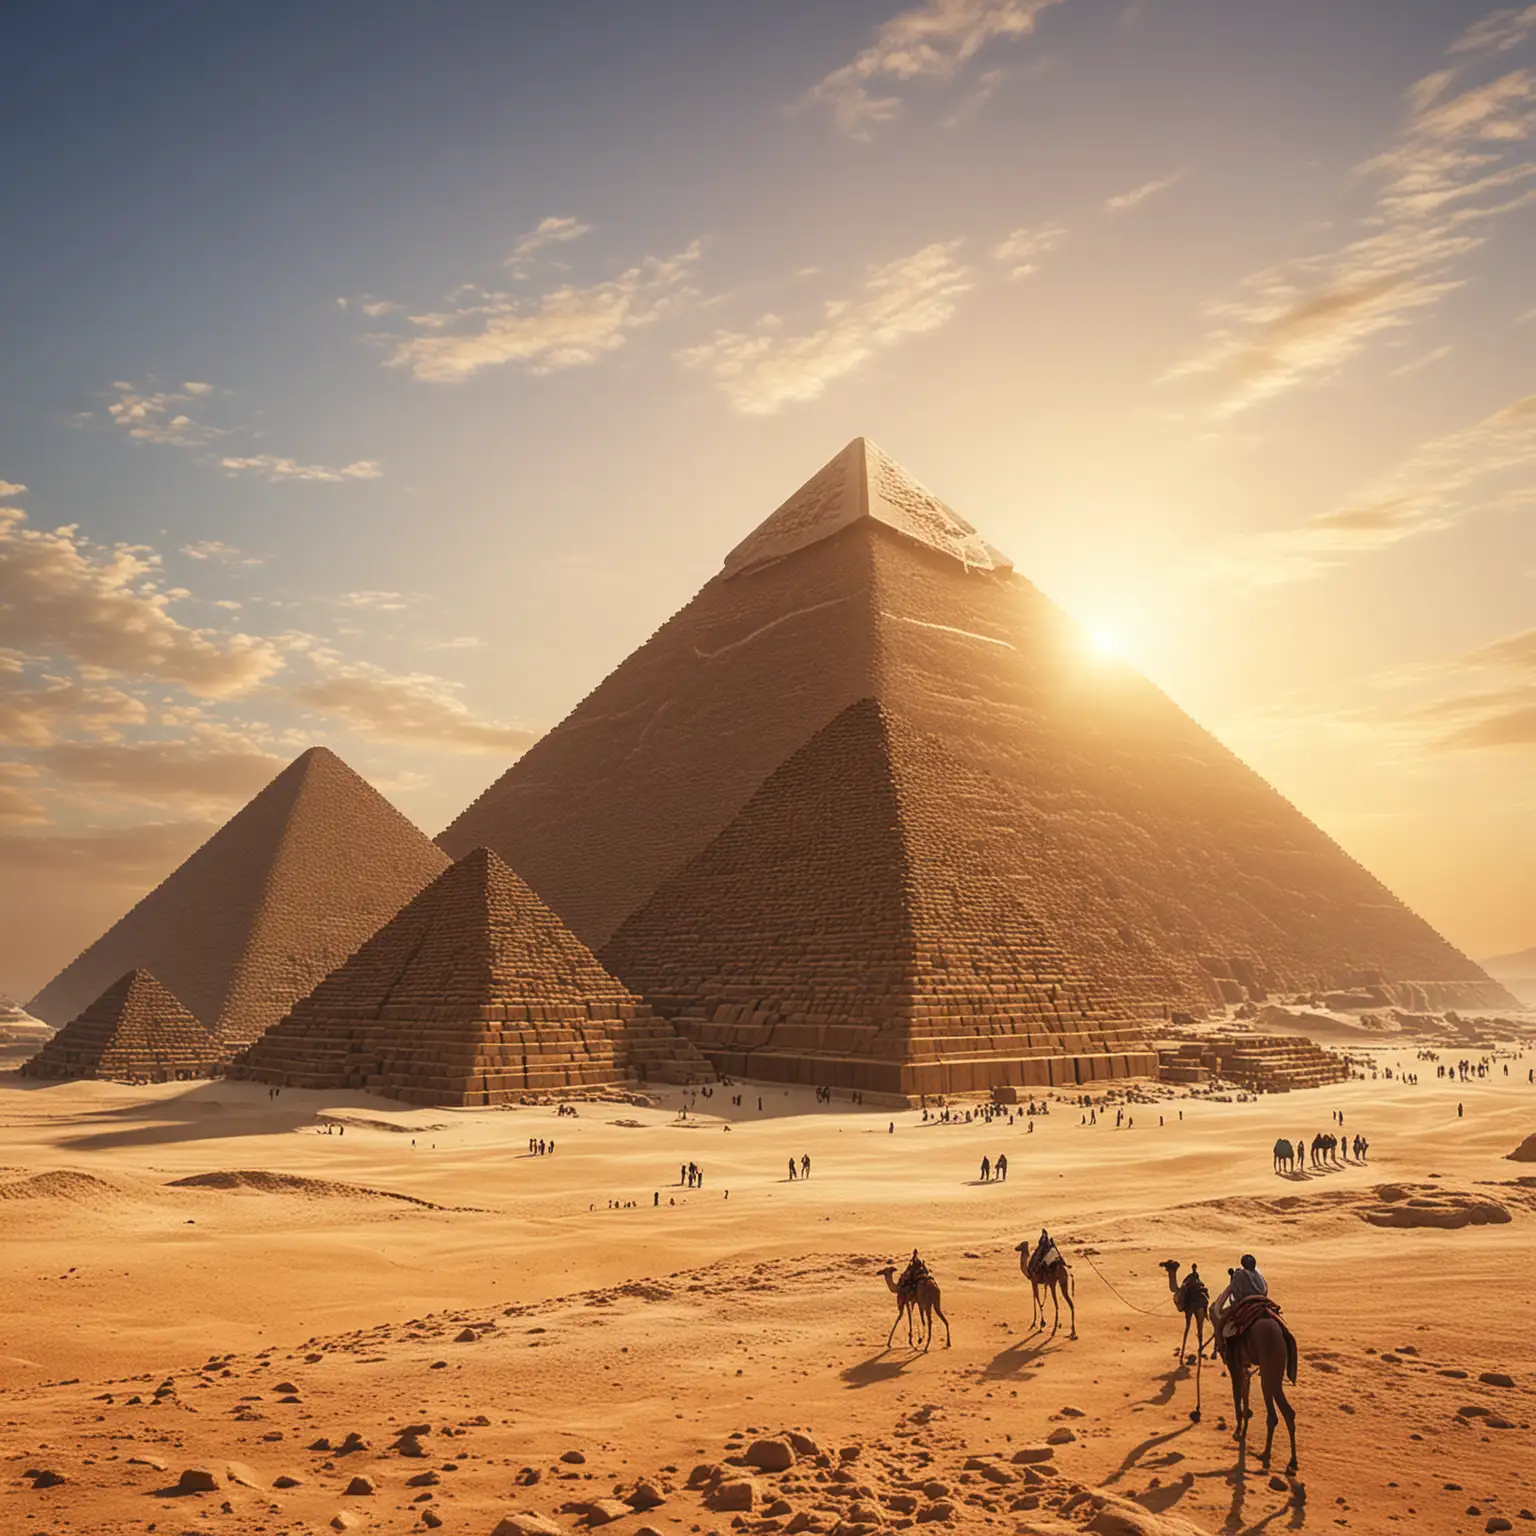 Great Pyramid of Giza in Giza, Egypt, Clear blue skies, Clear view of Pyramid, No crowds, No modern buildings, Warm and golden lighting, Digital illustration, Realistic with a touch of fantasy, Highly detailed and sharp focus, Ancient and majestic, Mysterious and awe-inspiring, Artstation